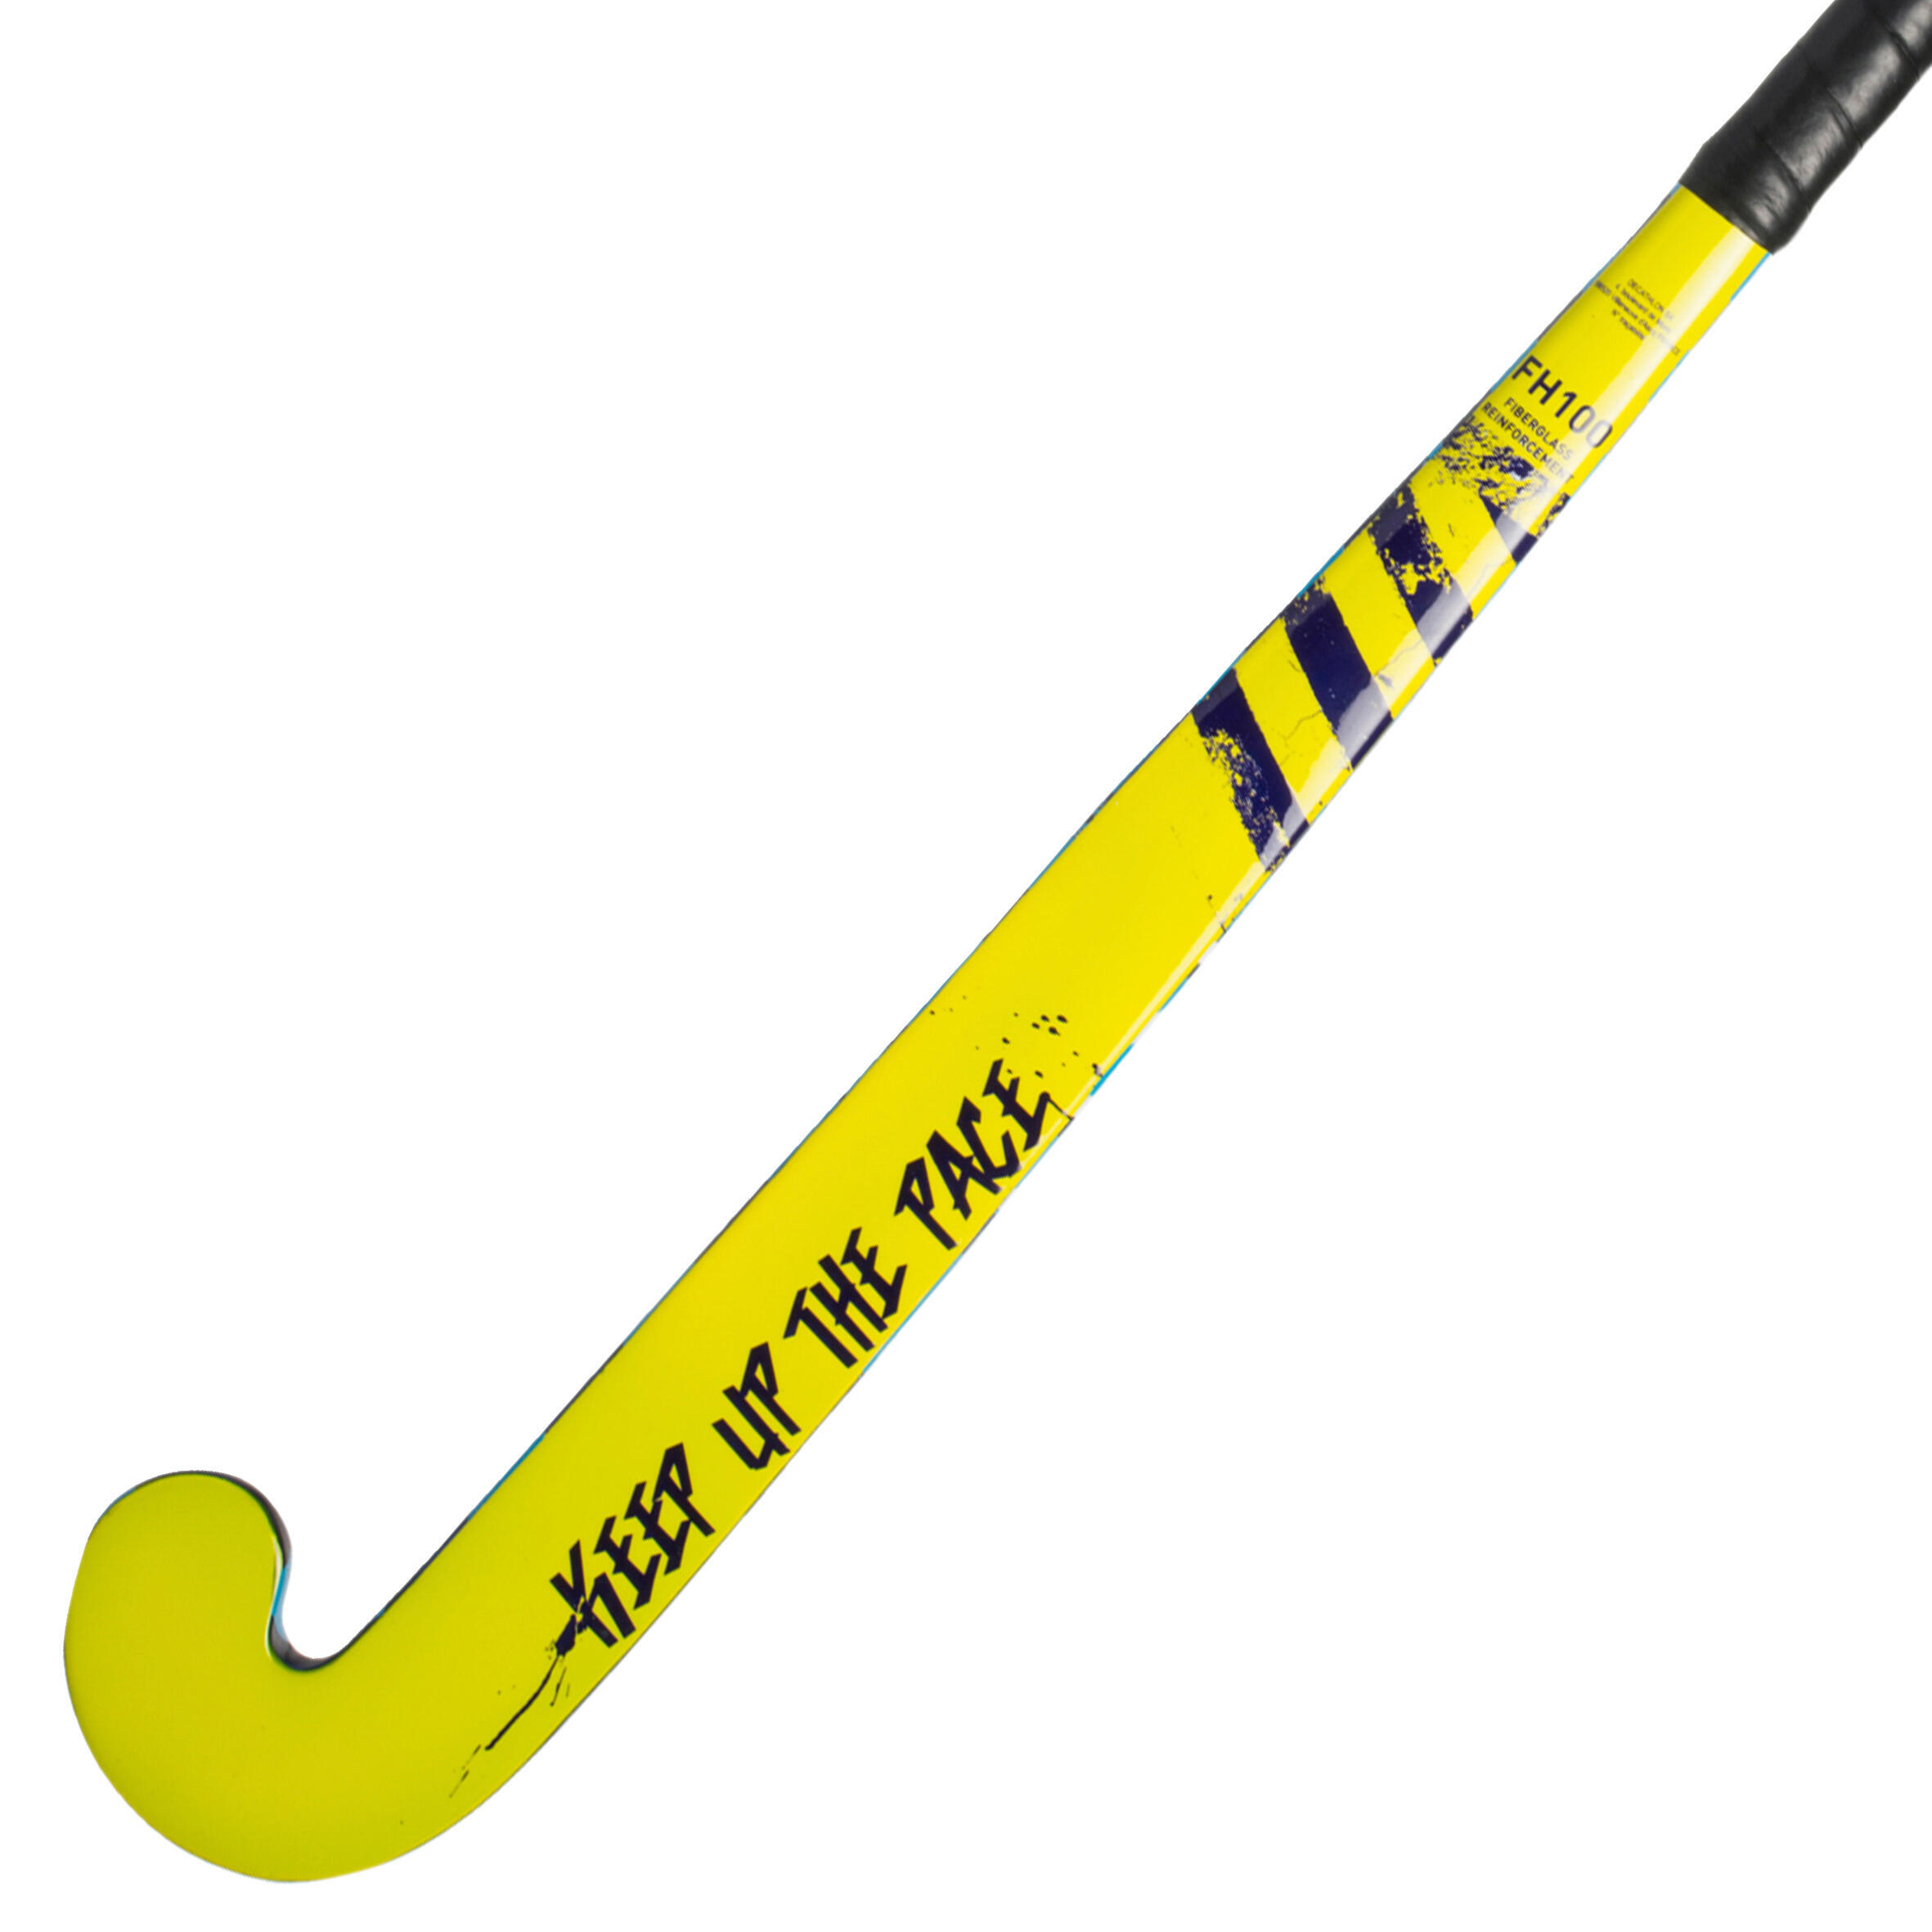 FH100 Kids' Beginner/Occasional Adult Field Hockey Wooden/FB Stick - Yellow/Blue 1/8